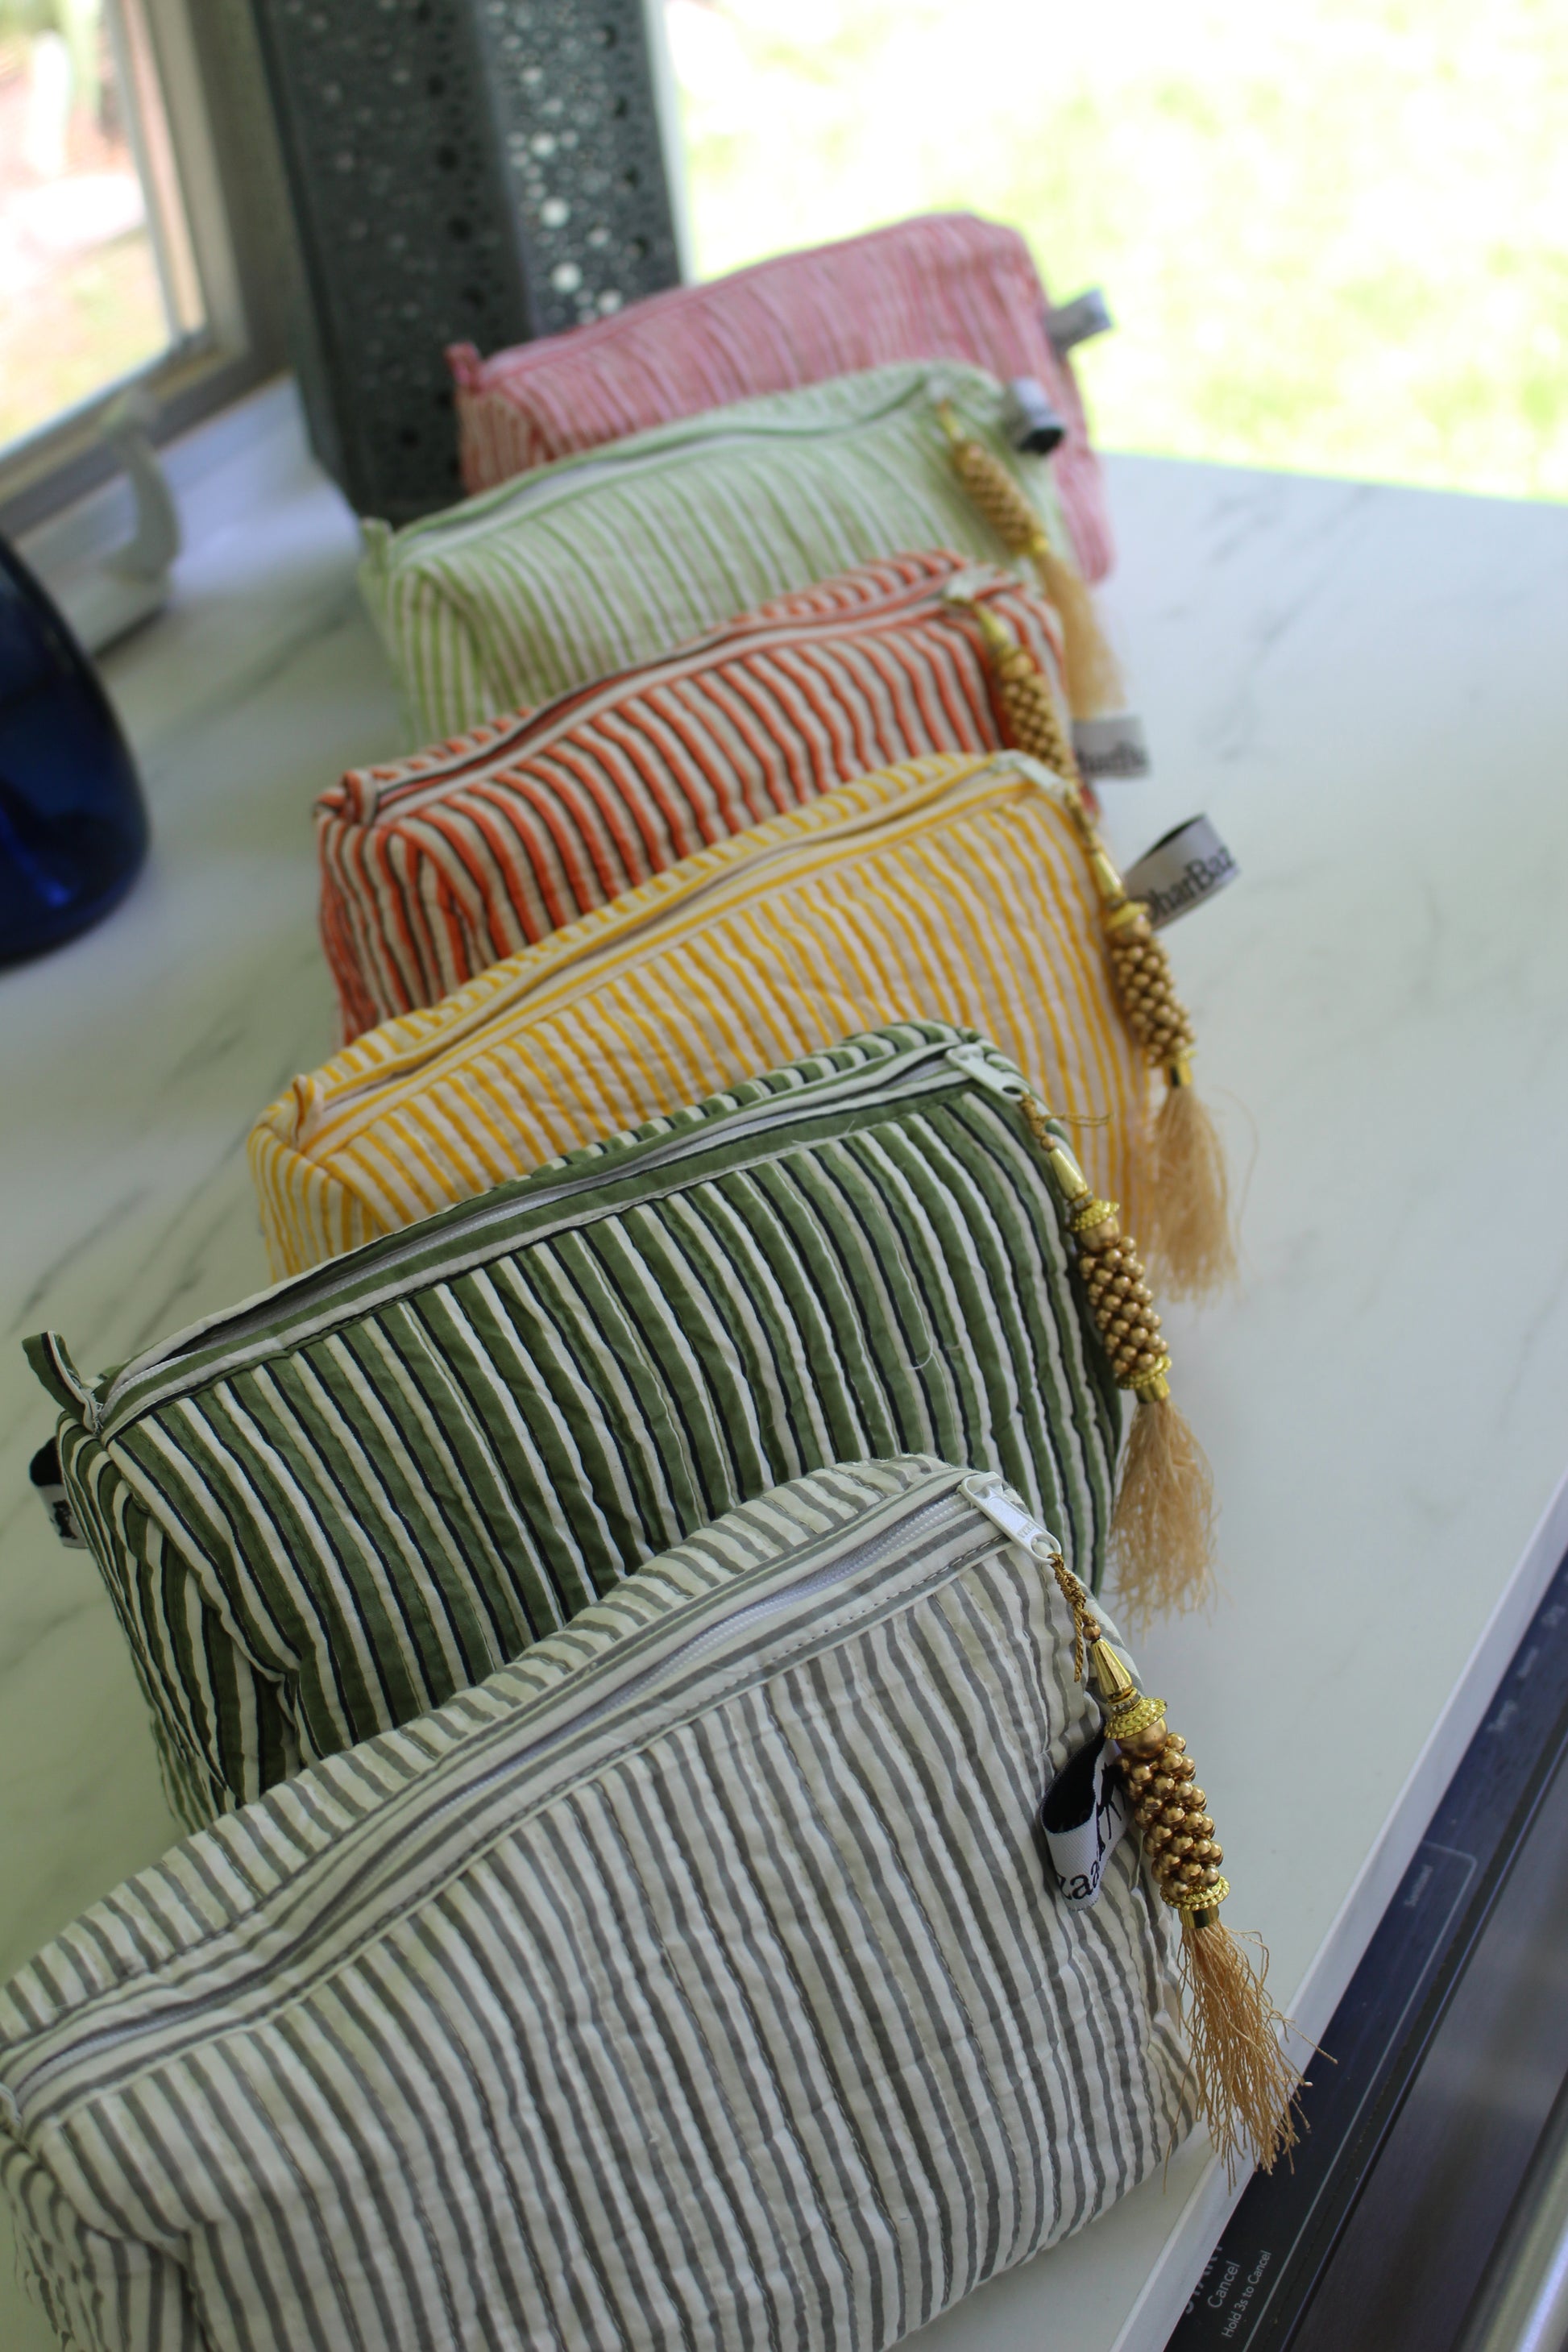 Set of 3 Striped Travel Pouches Collection | Cosmetics Bag | Travel Essentials | Toiletries Bag | Makeup Bag - DharBazaar